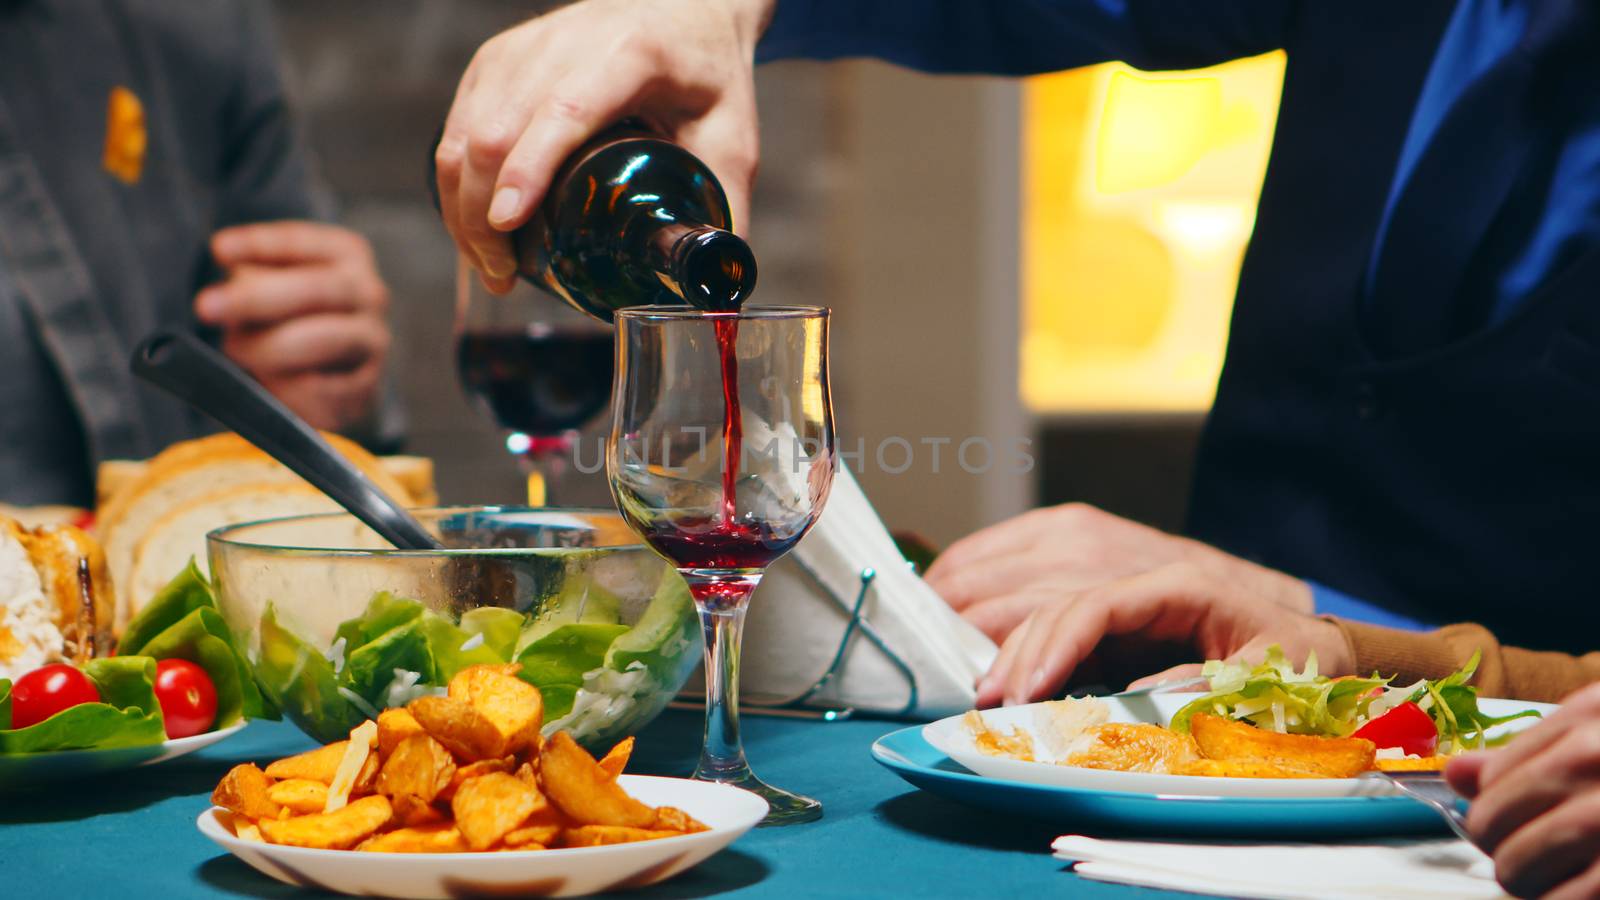 Zoom in shot of young man pouring red wine into a glass by DCStudio